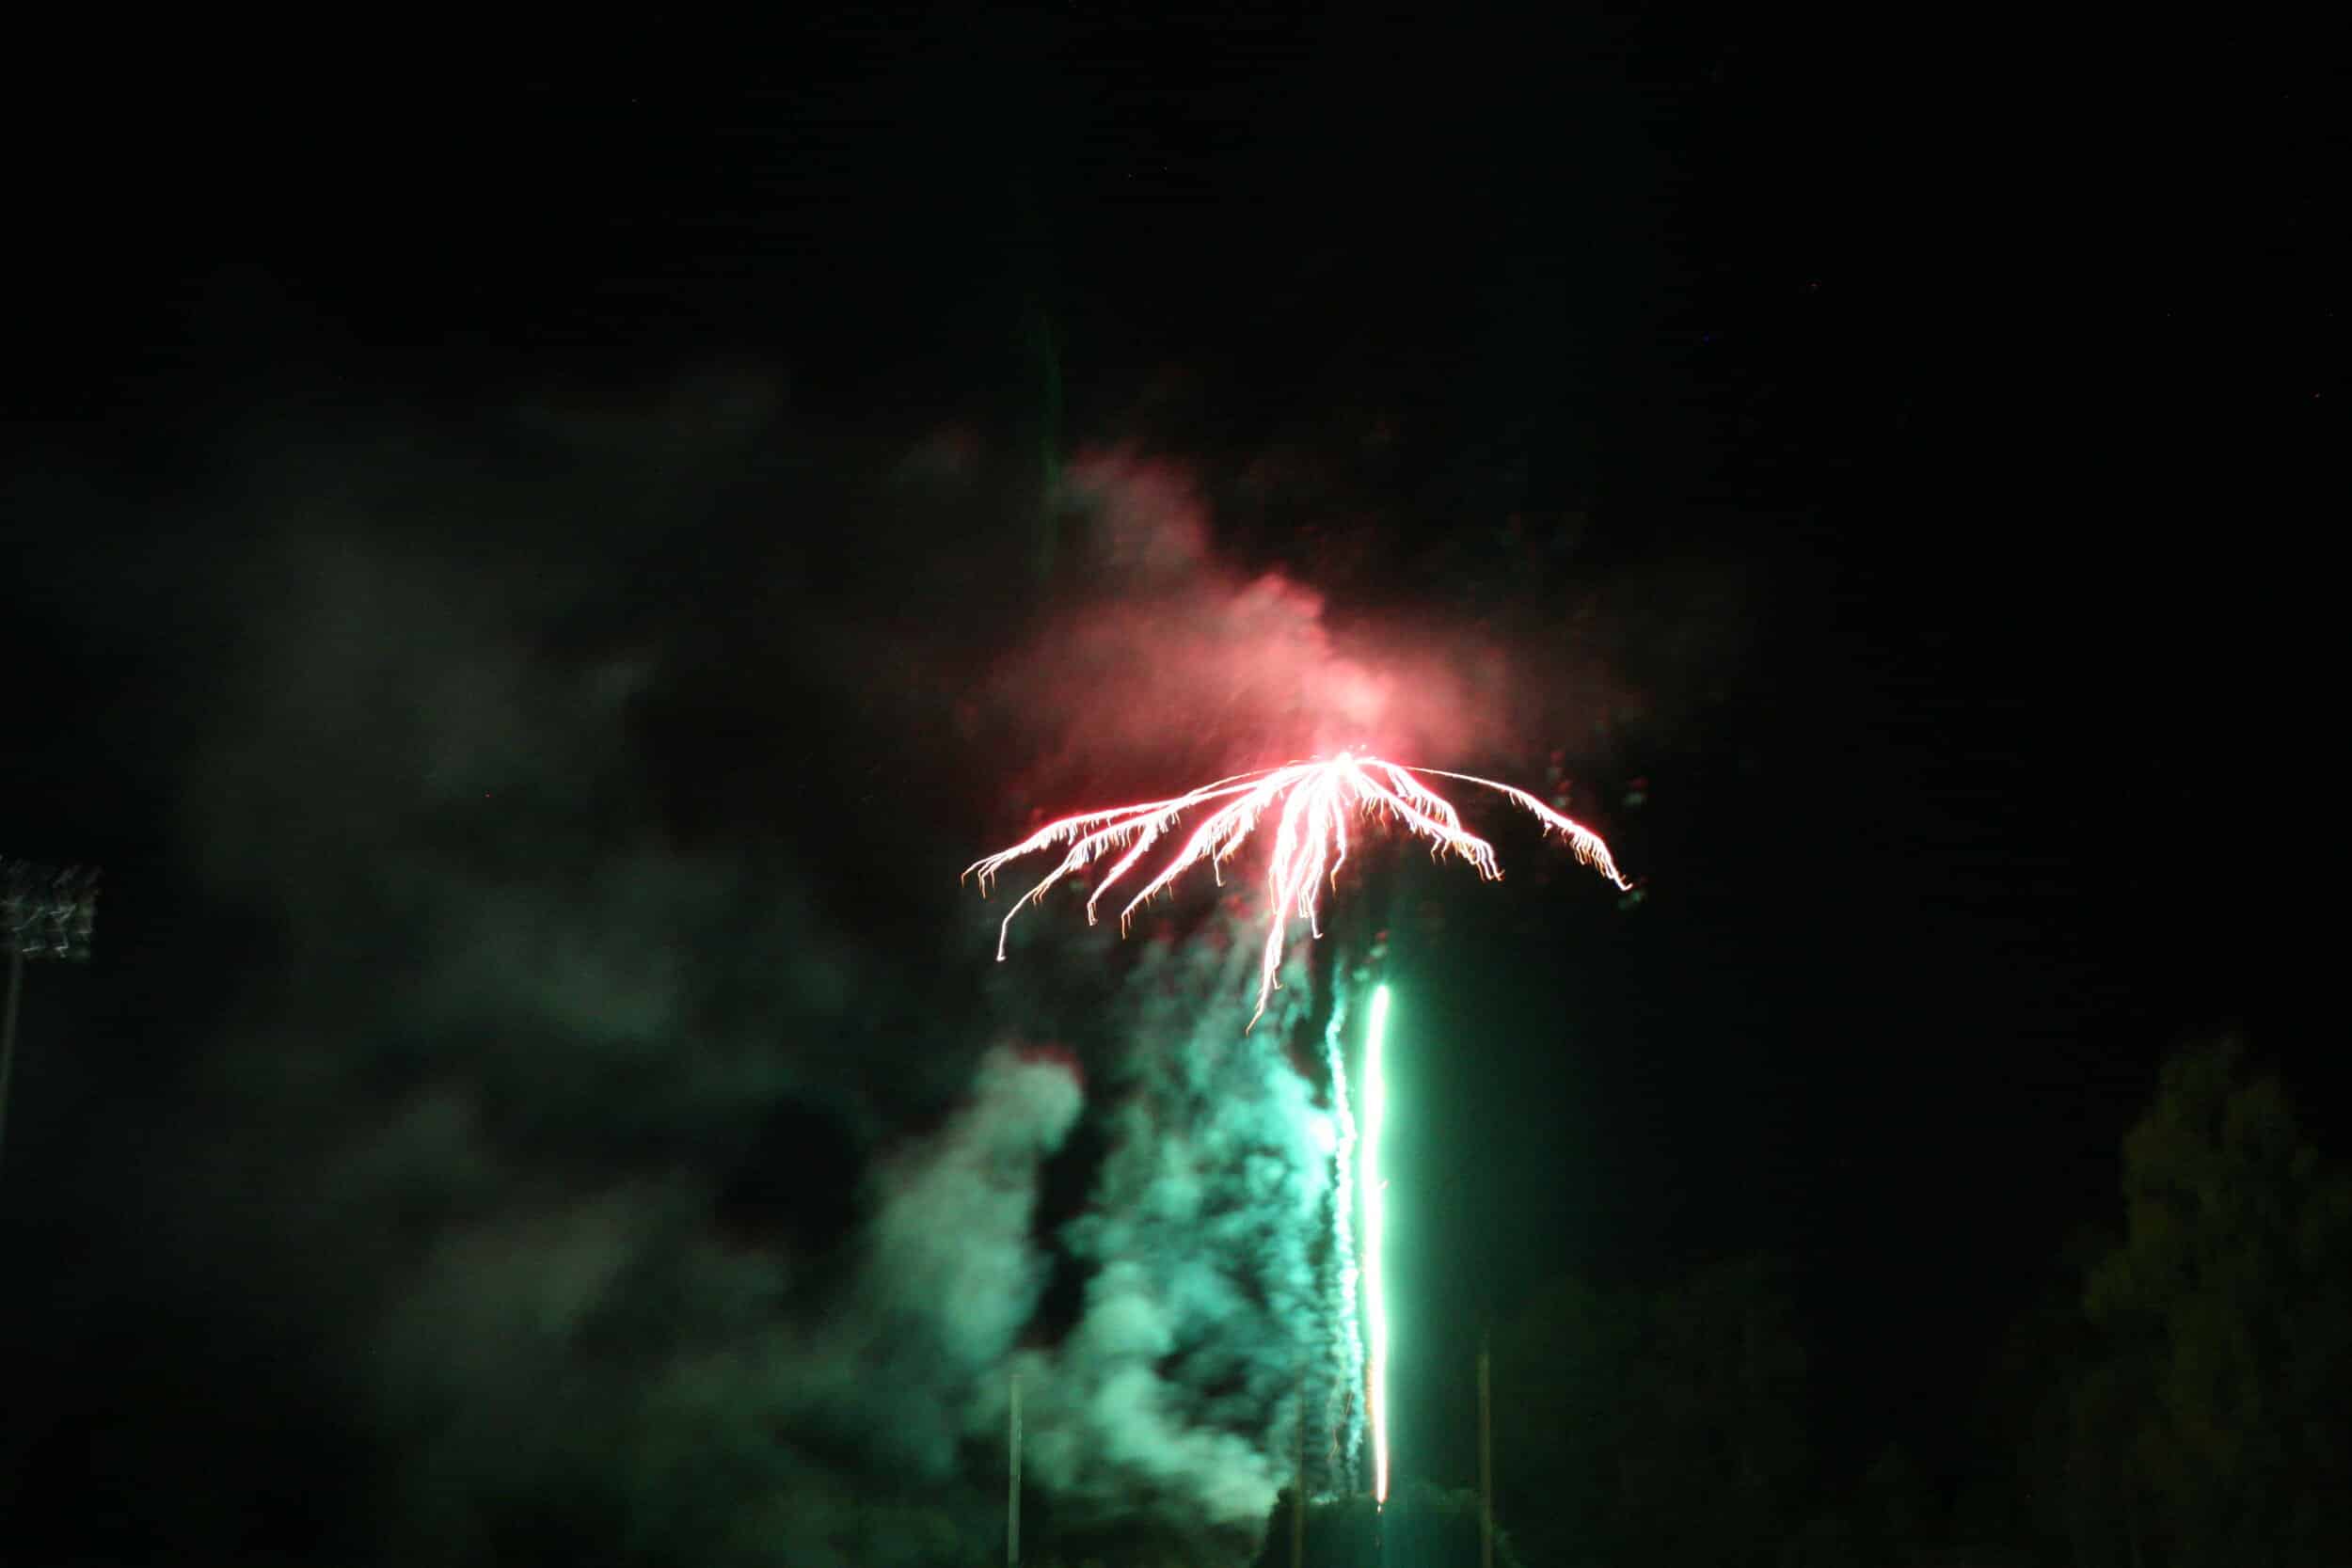 Homecoming weekend is topped off with fireworks to light up the night sky.